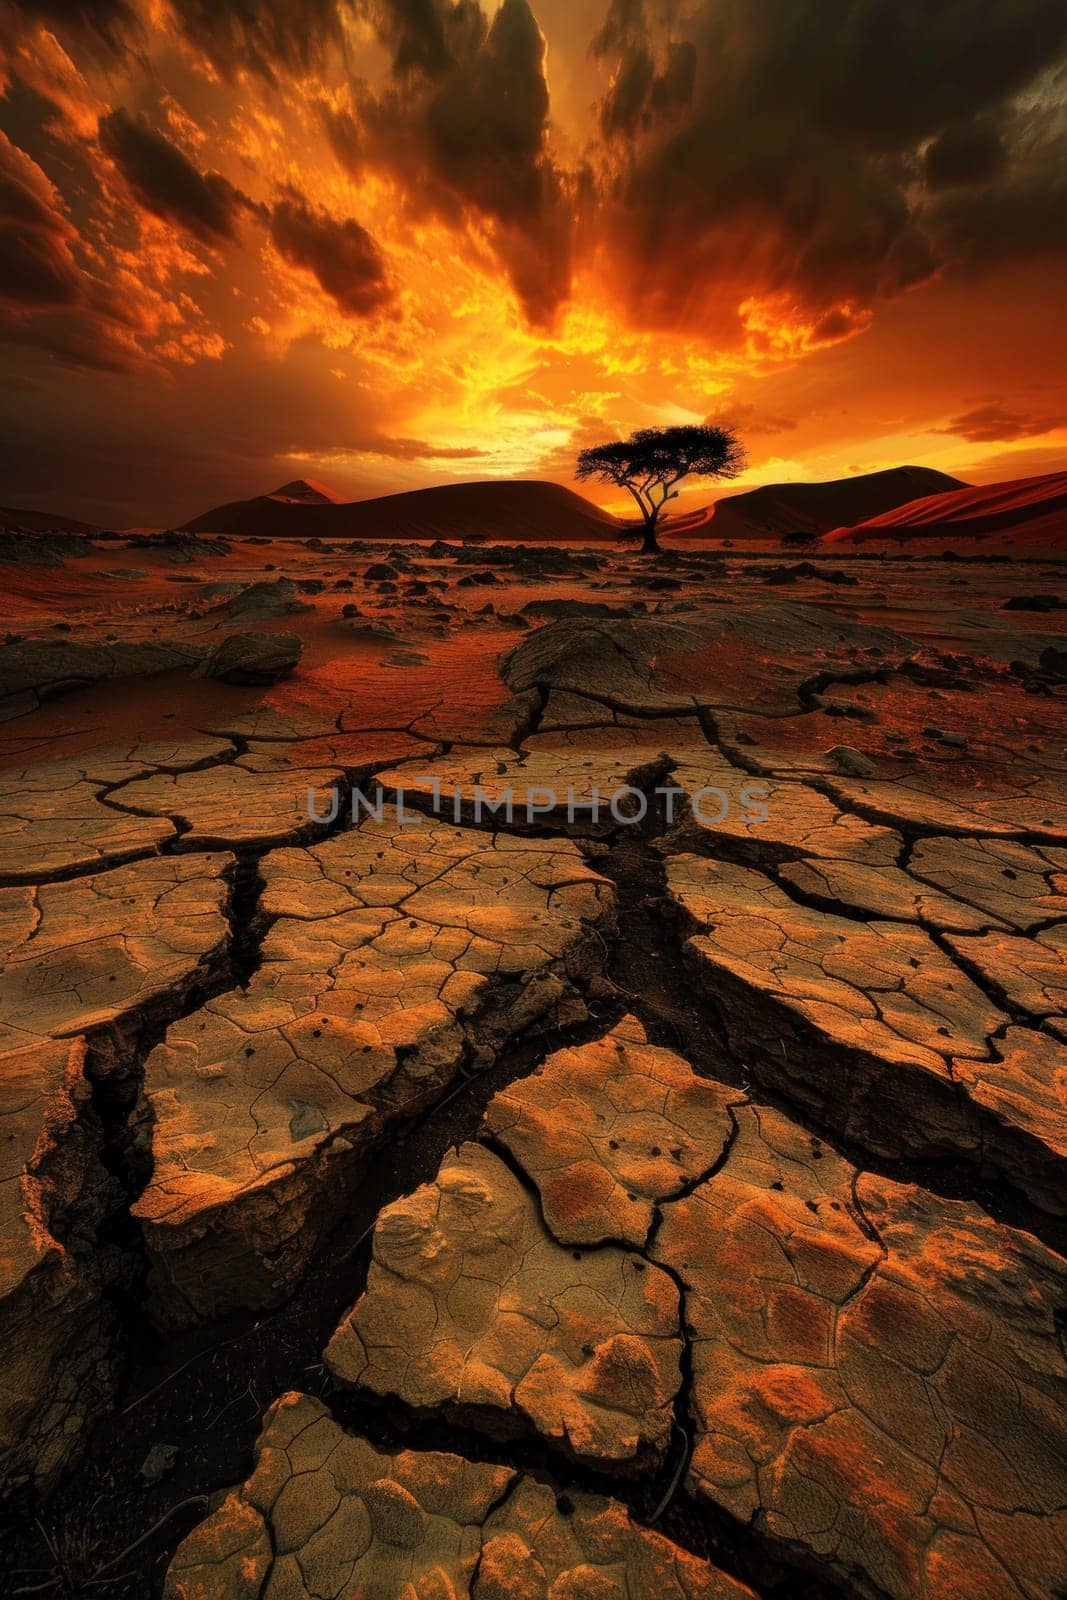 Lone tree standing in dramatic sunset landscape in the desert with cracked ground and travel adventure theme